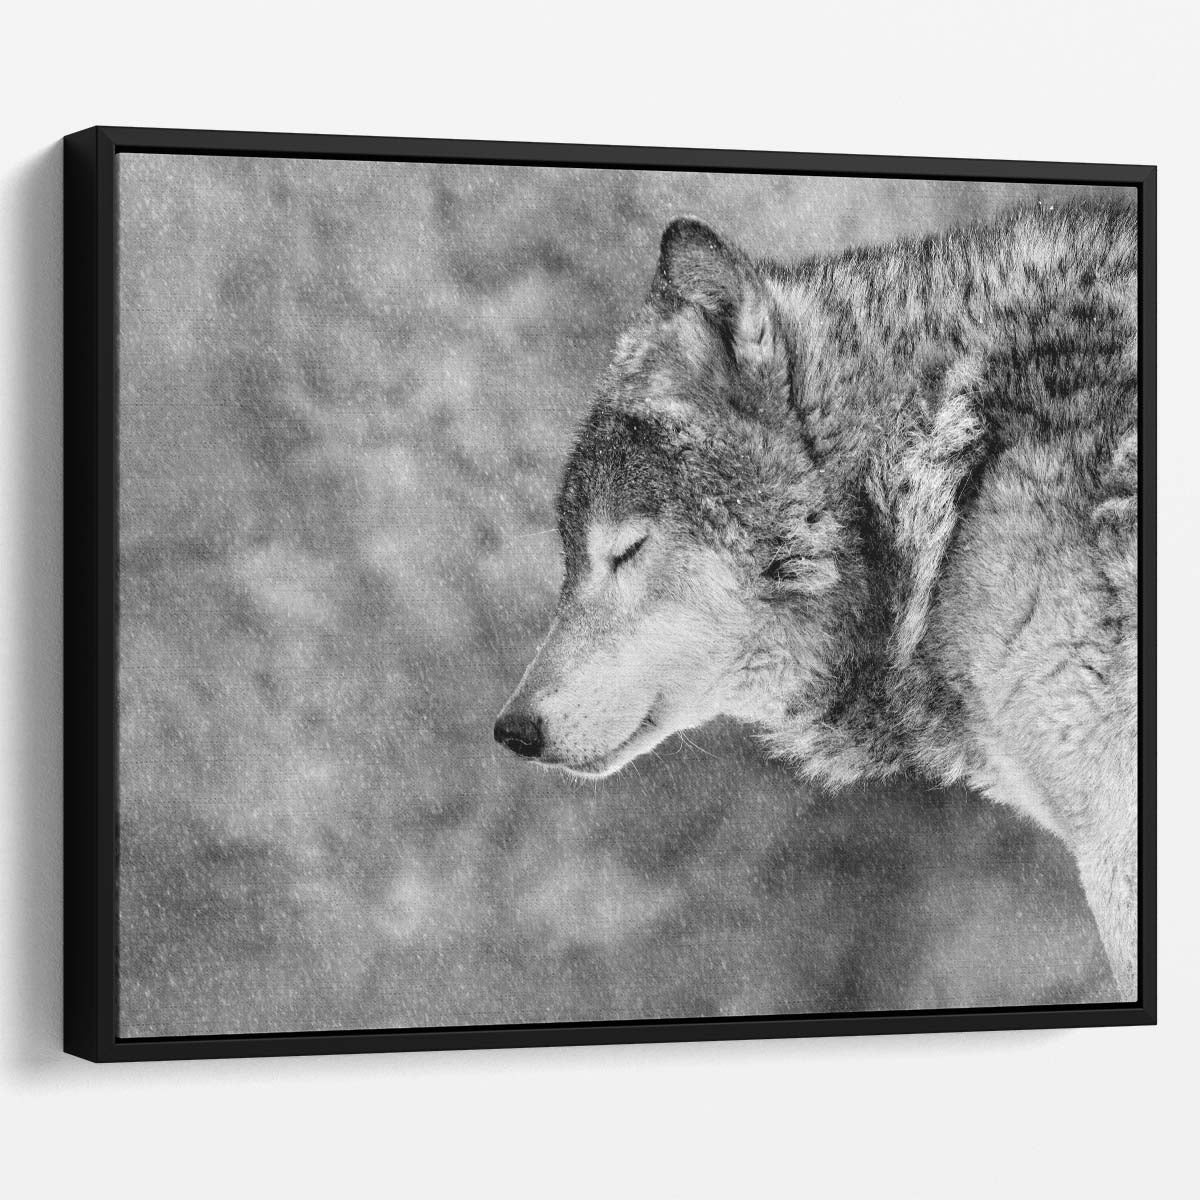 Serene Snow Wolf in Blissful Winter Wall Art by Luxuriance Designs. Made in USA.